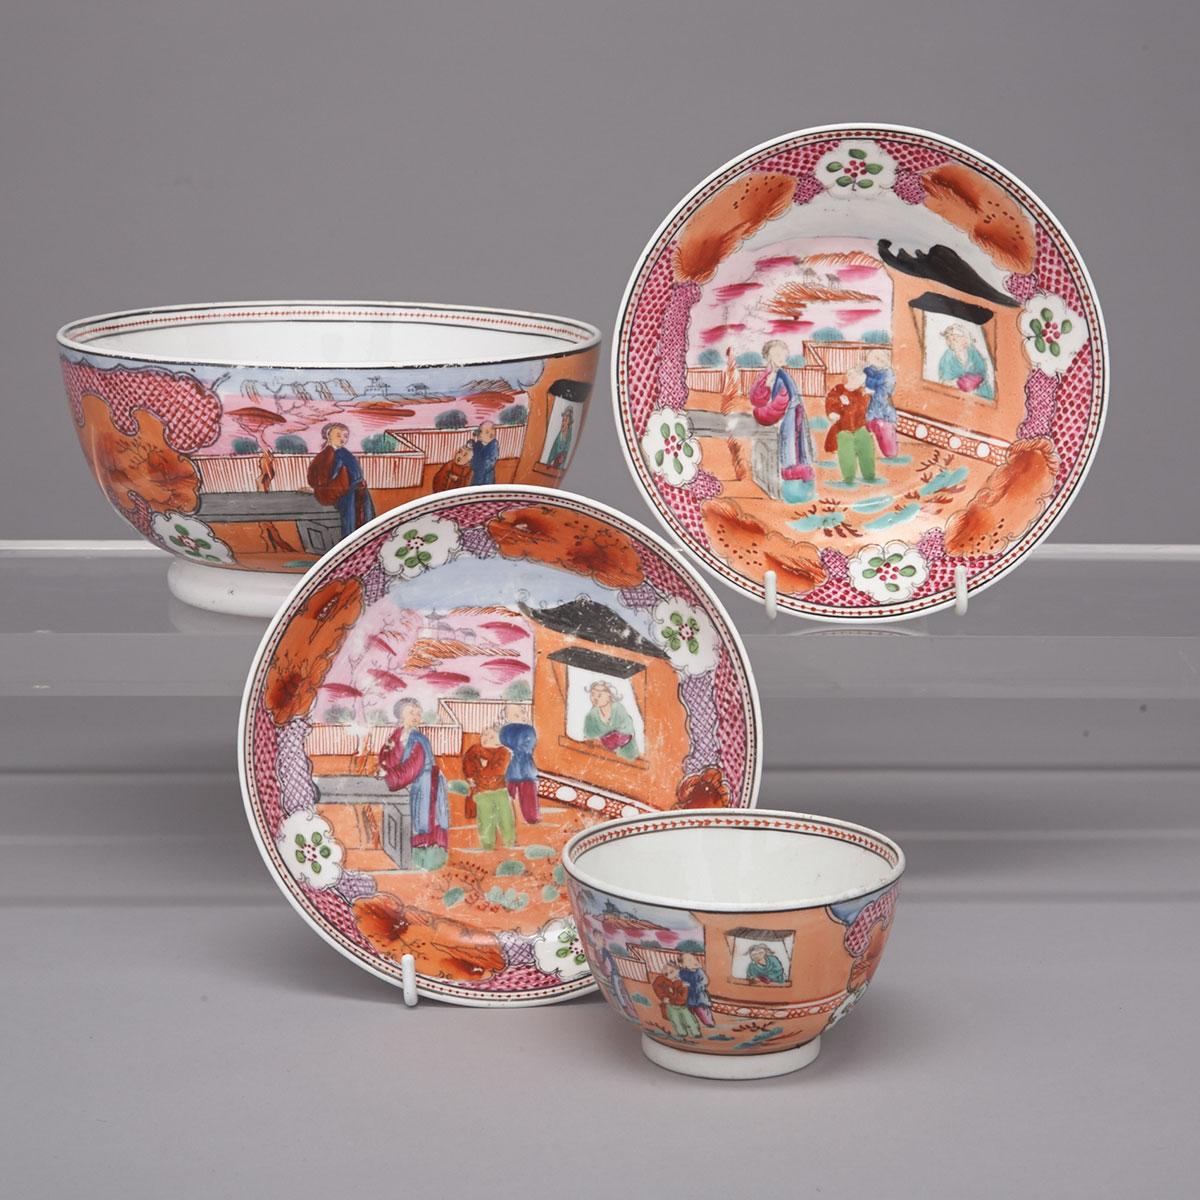 Newhall ‘Boy in the Window’ Pattern’ Slop Bowl, Tea Bowl and Two Saucers, c.1800